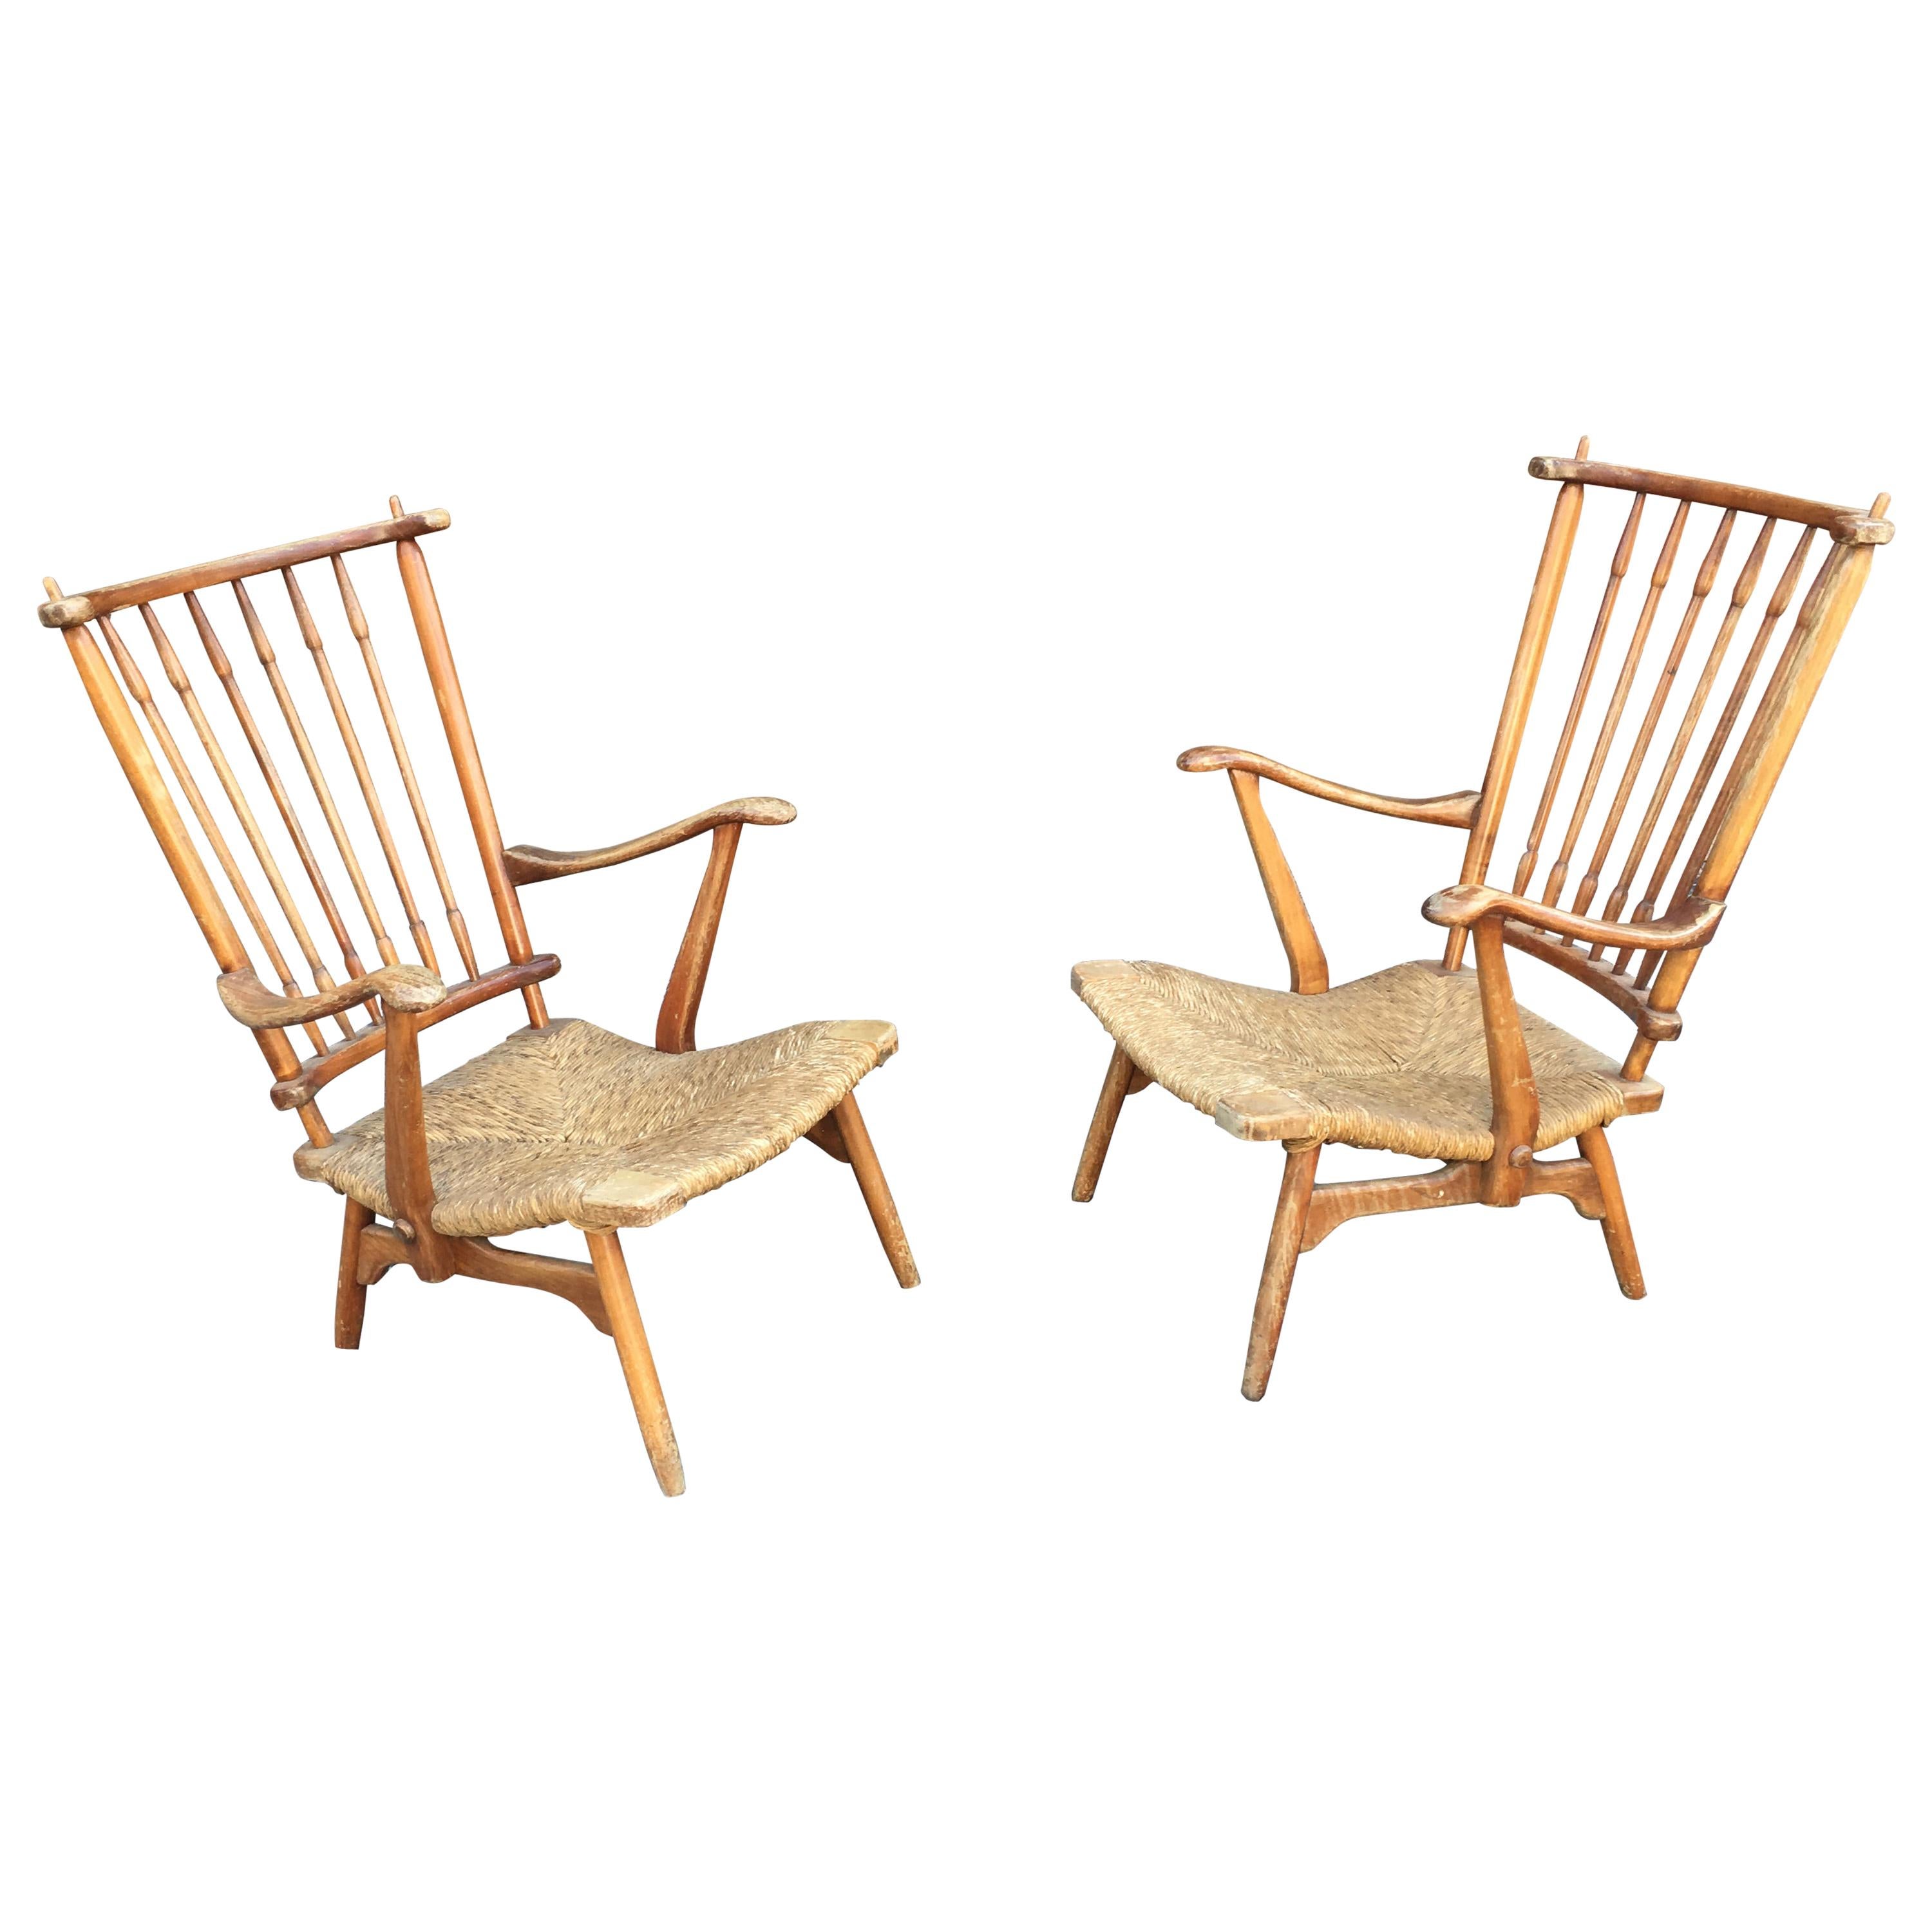 Paolo Buffa 'Attributed to' Pair of Cherrywood and Straw Italian Armchairs